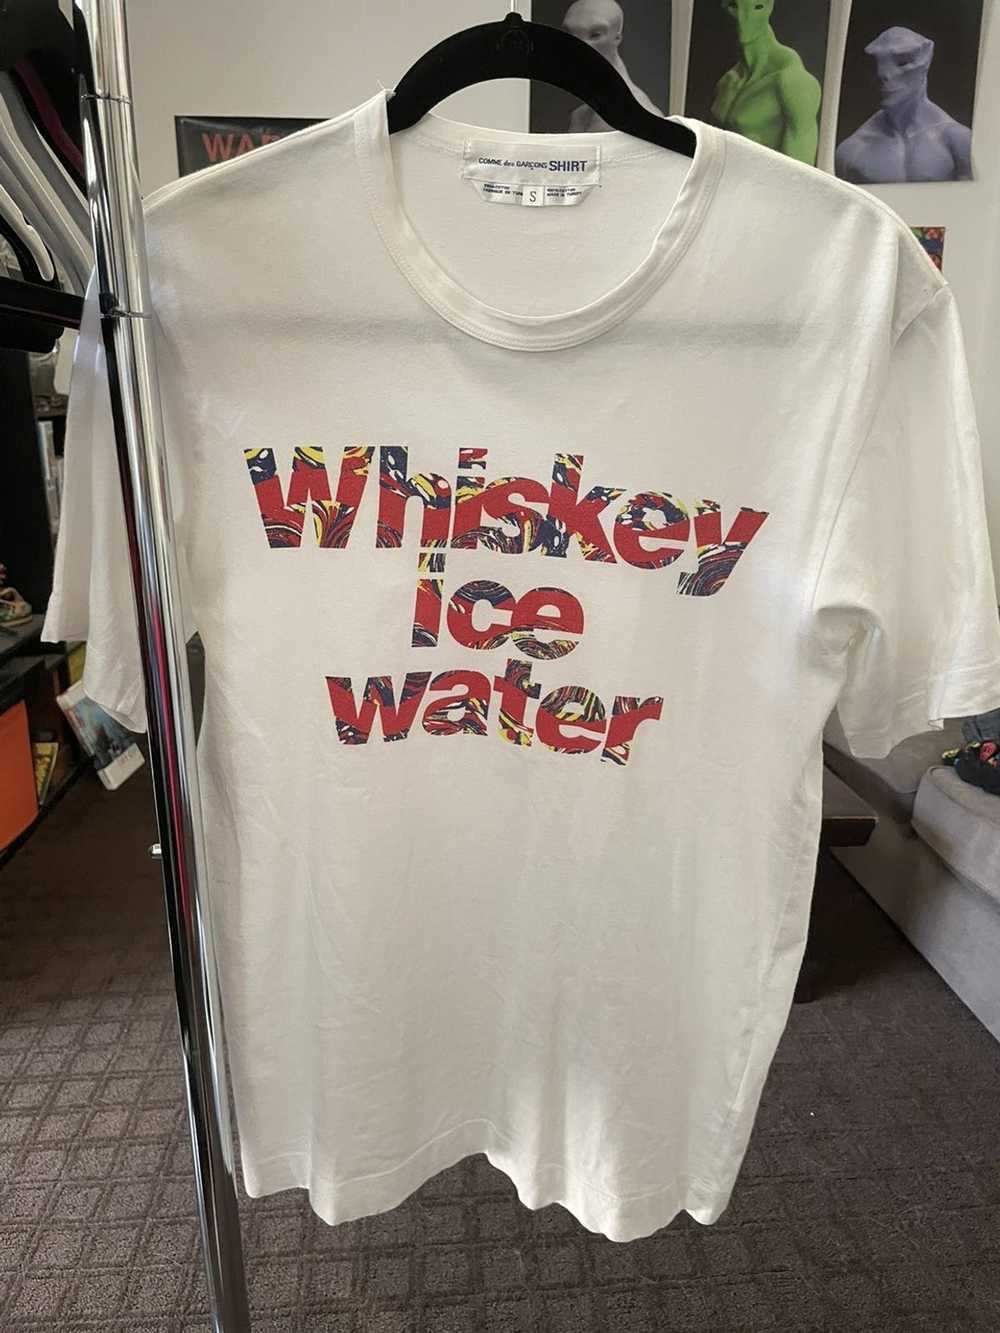 Comme des Garcons Whiskey ice water - image 1